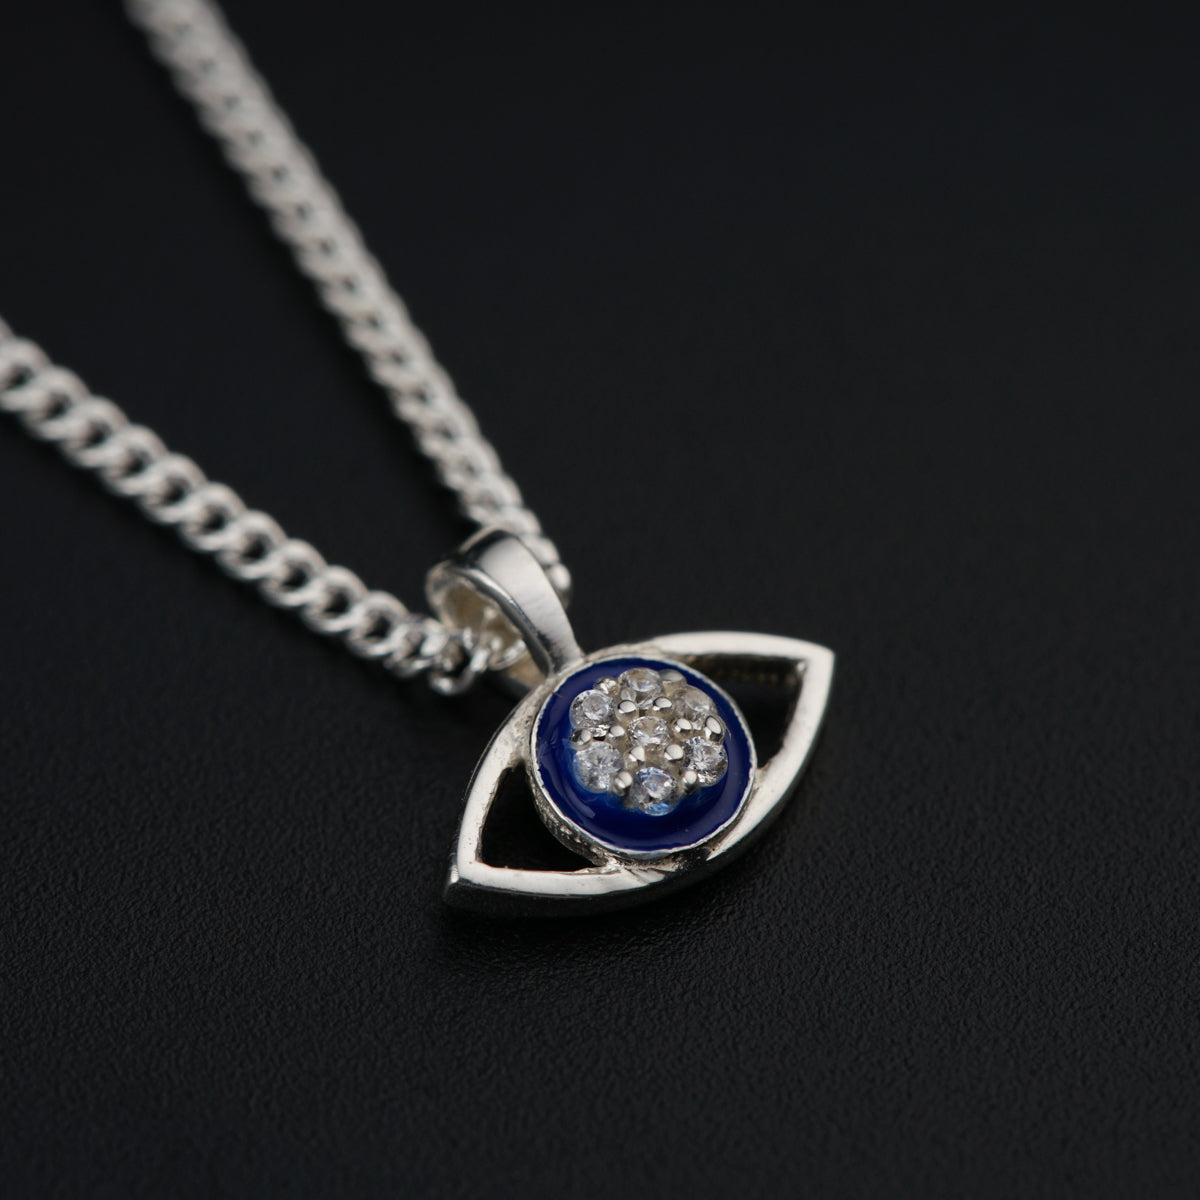 a silver necklace with a blue and white pendant